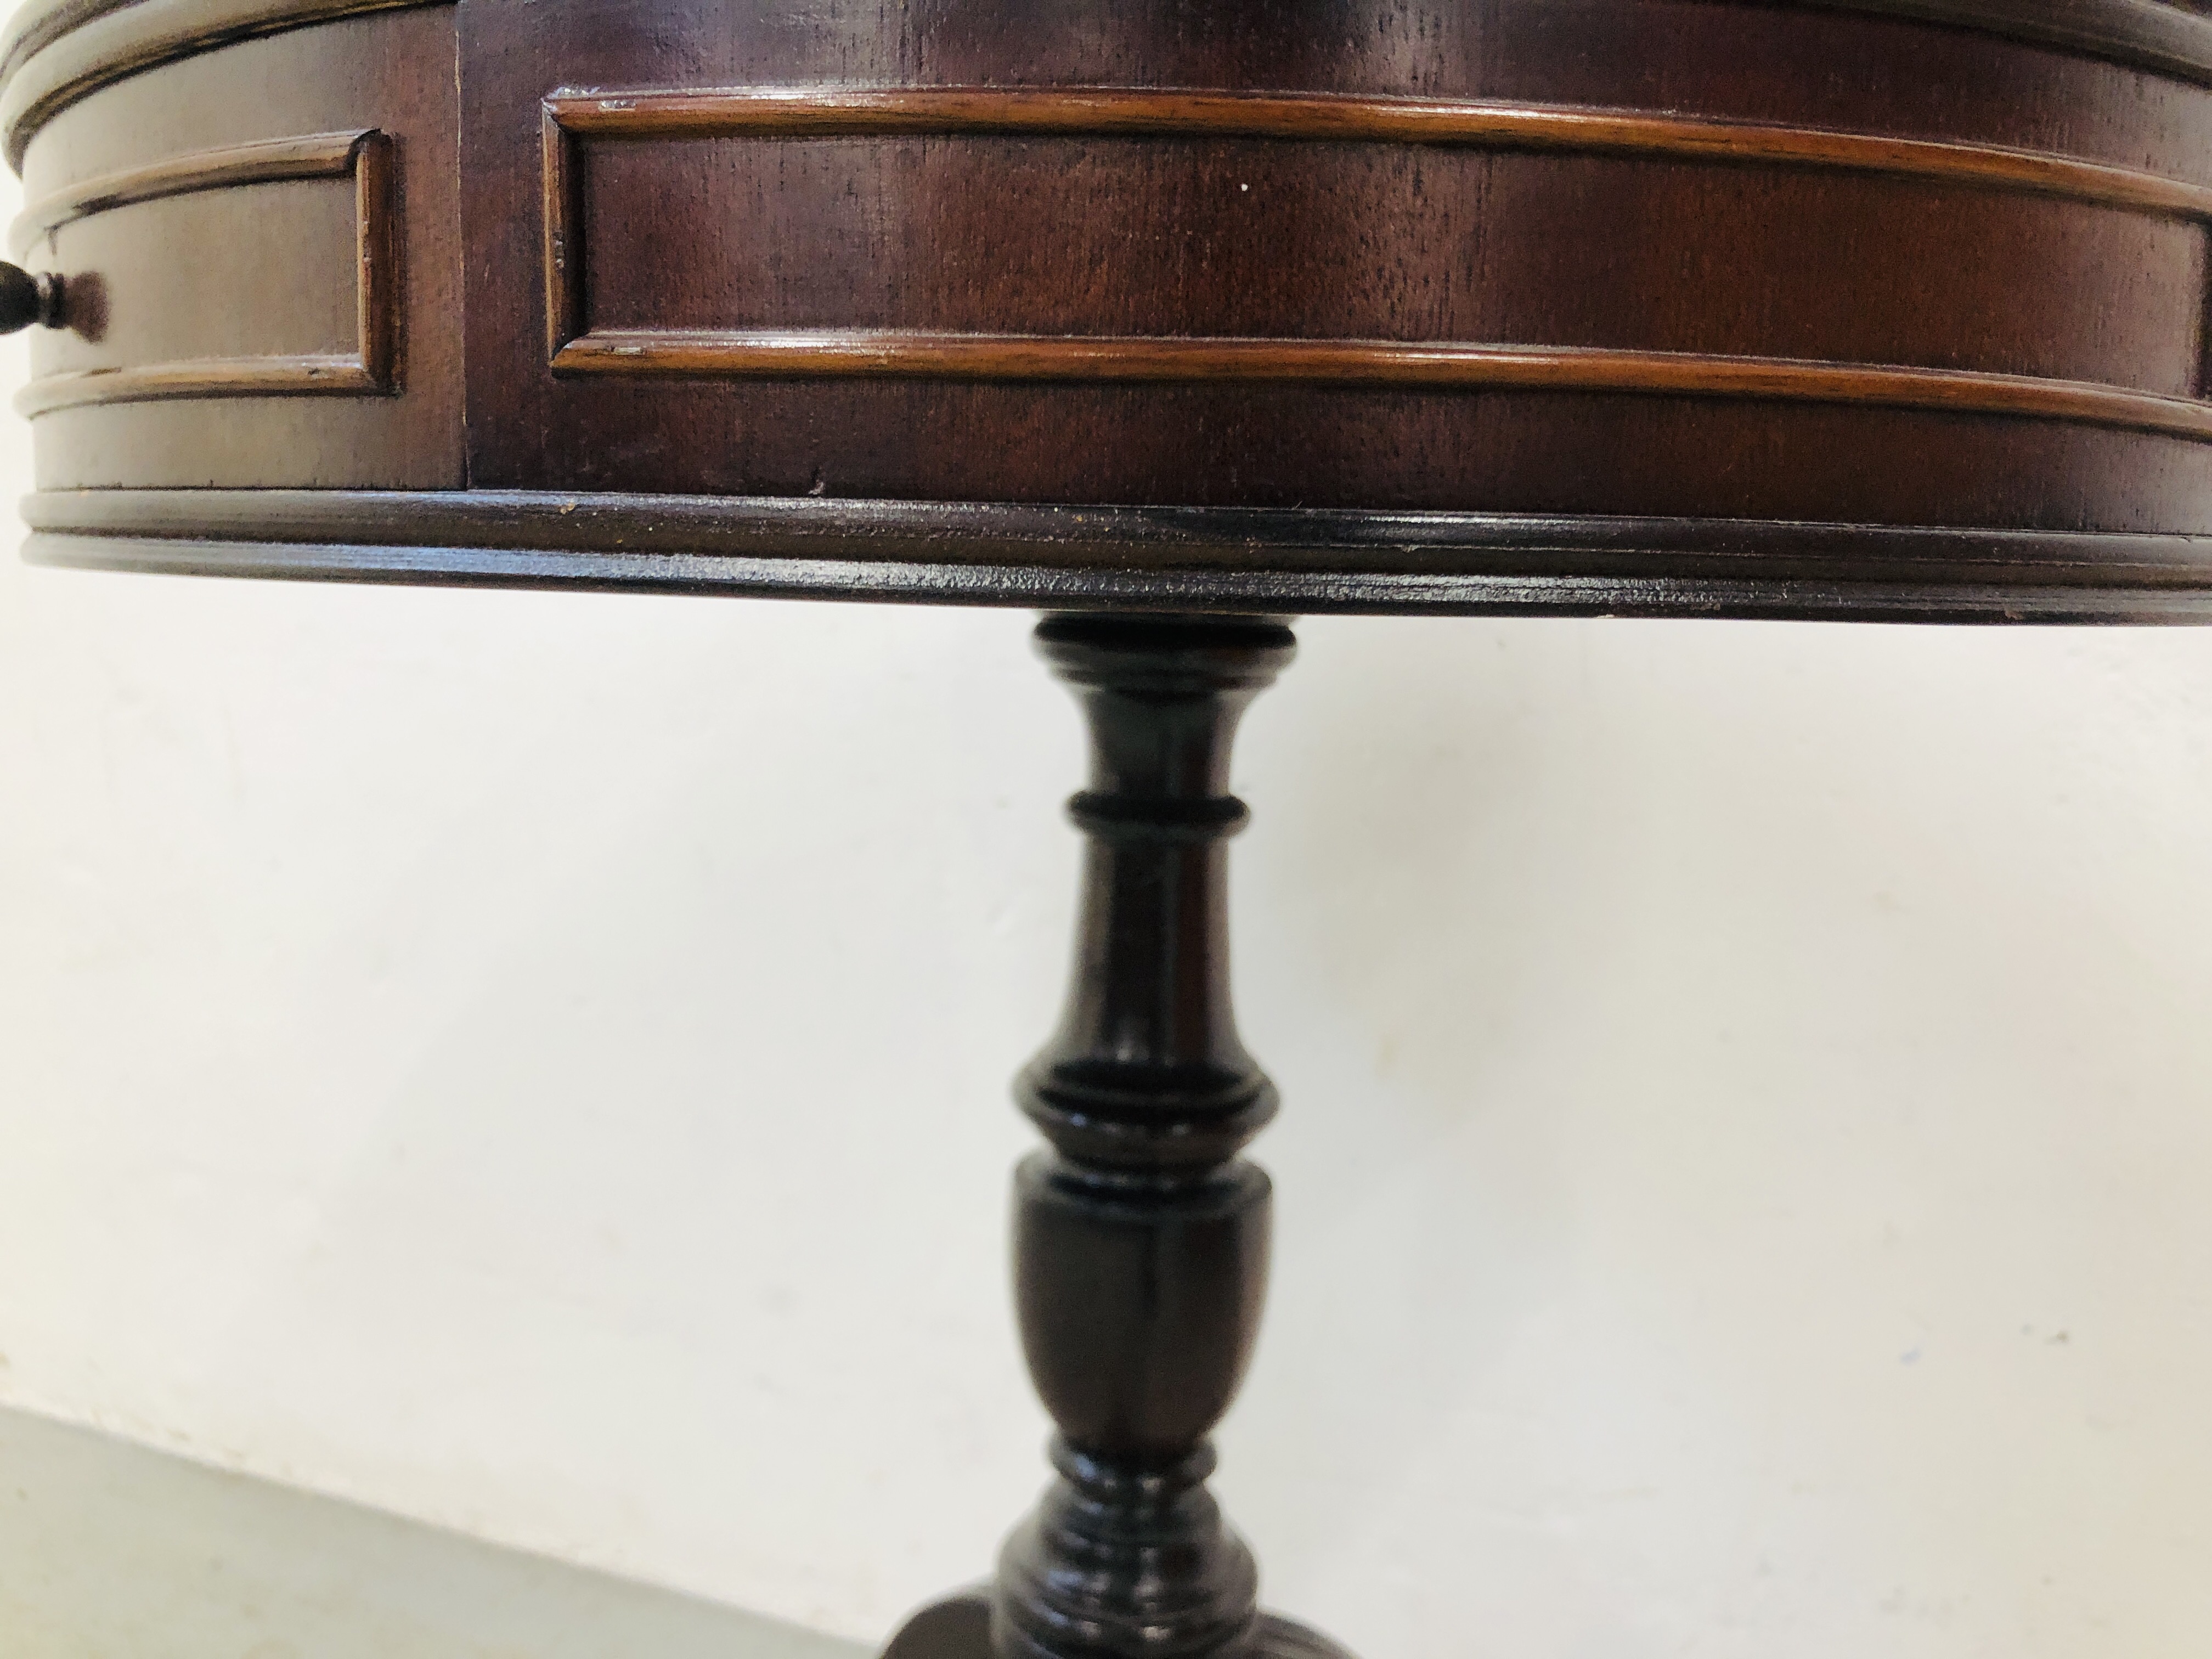 REPRODUCTION SINGLE PEDESTAL DRUM TABLE WITH TOOLED LEATHER TOP - Image 6 of 7